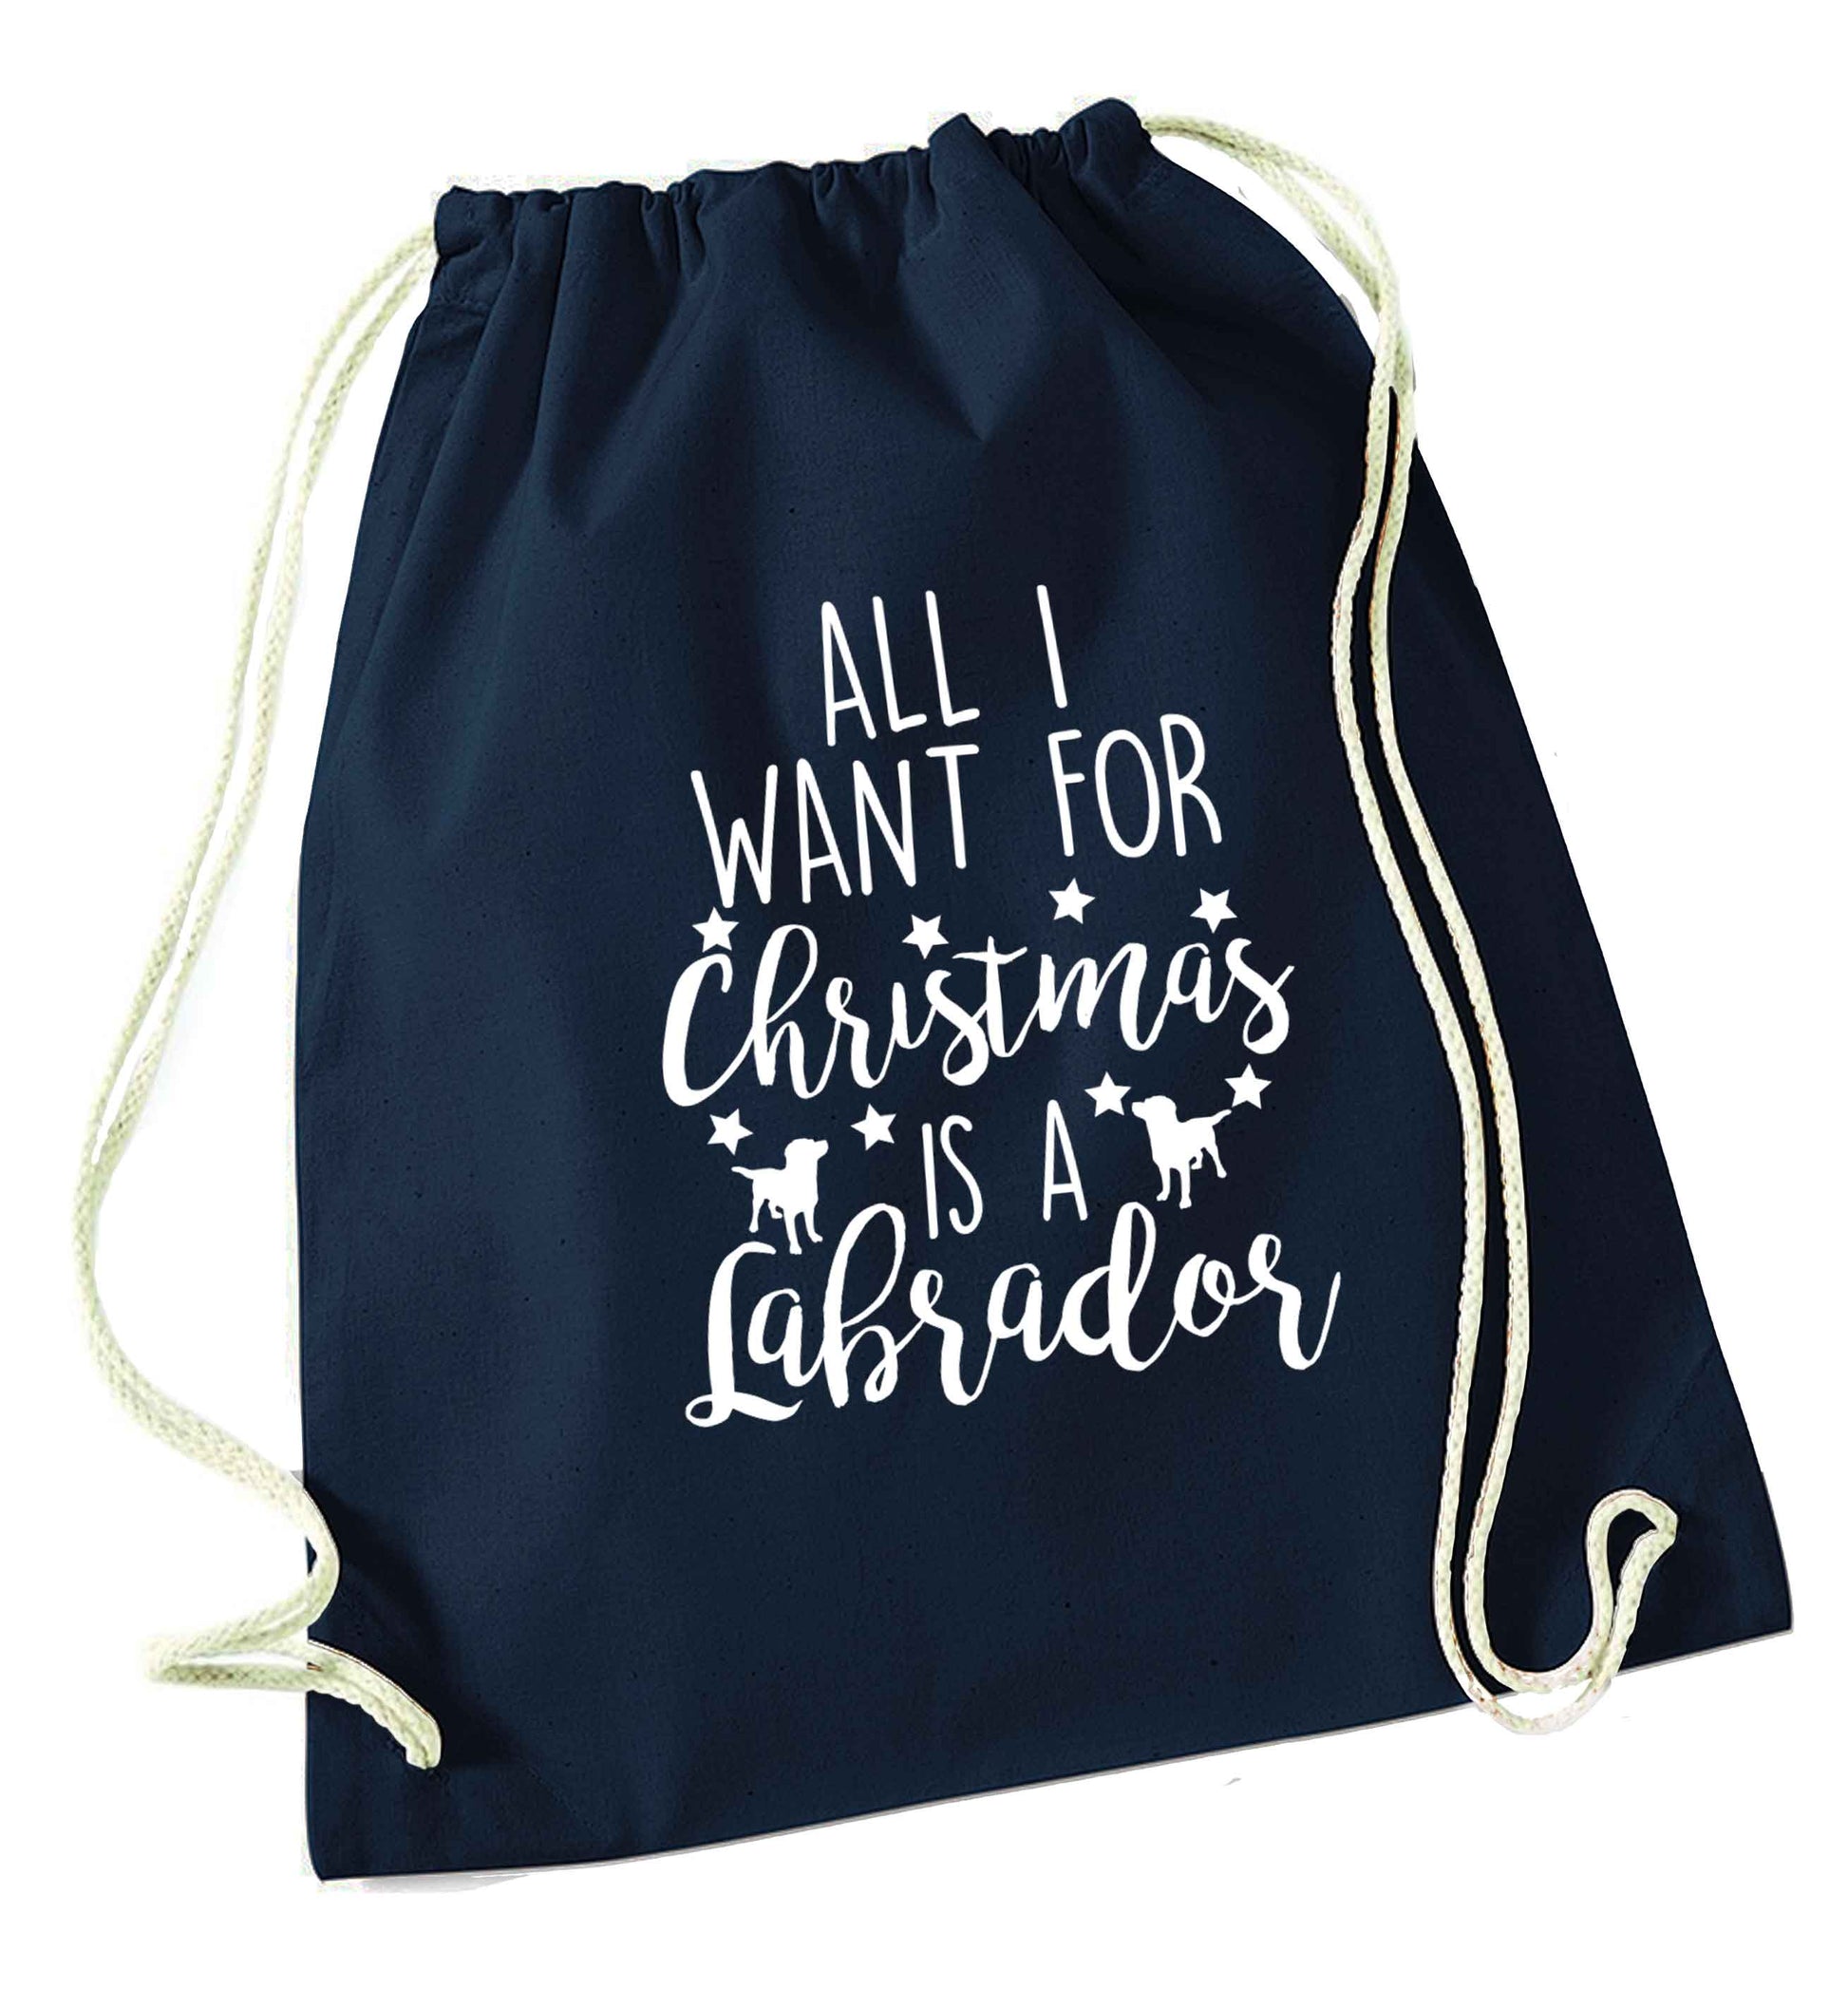 All I want for Christmas is a labrador navy drawstring bag